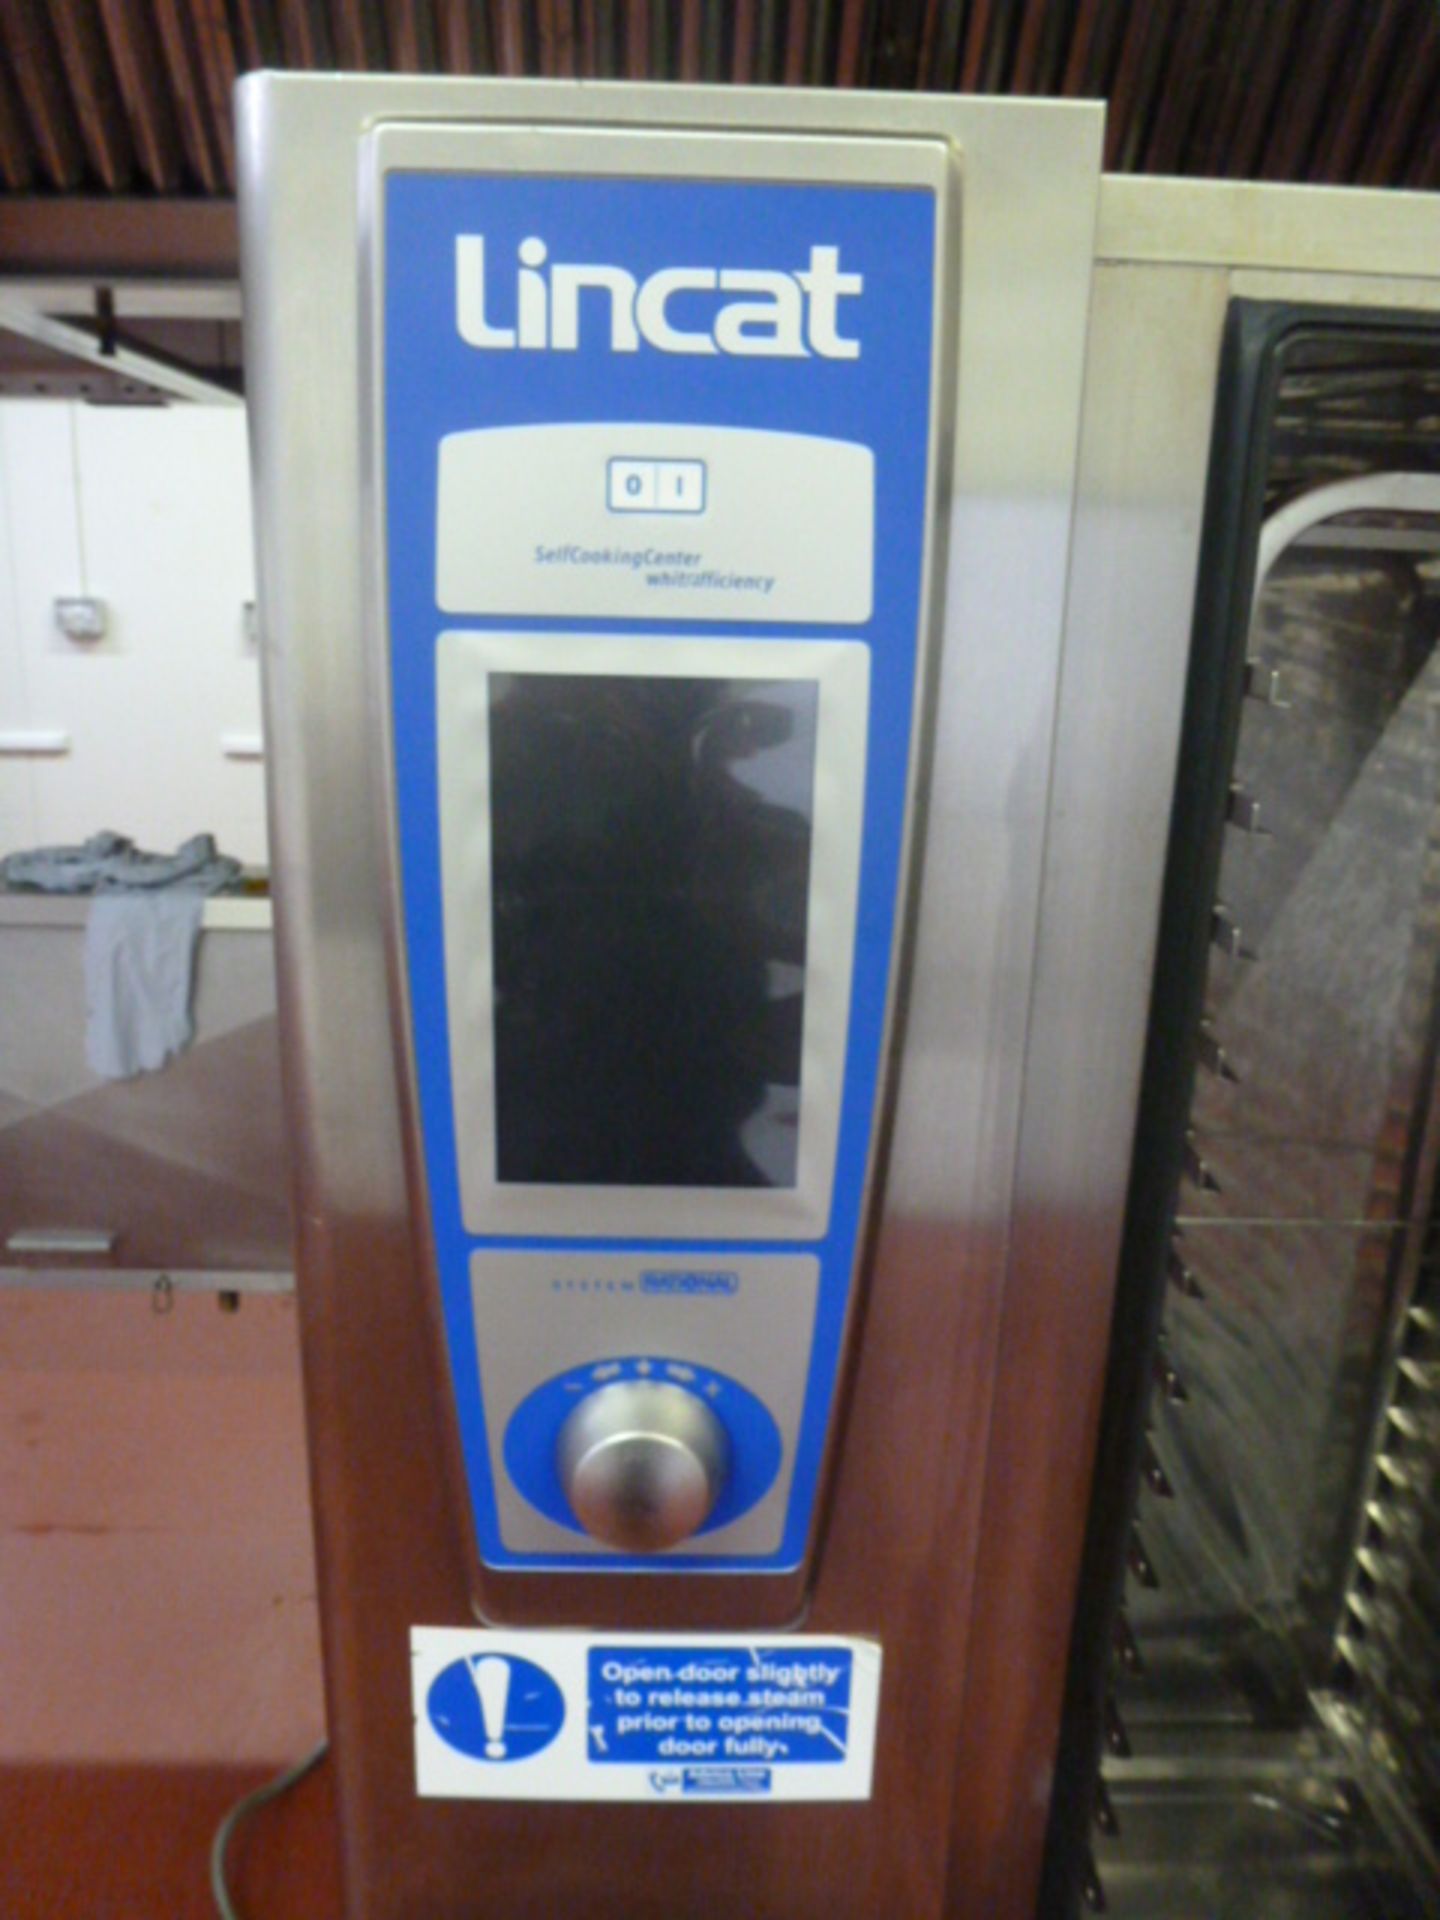 Lincat 20 Rack Rational Combination Steam Self Cooking Centre, White Efficiency with Mobile 20 - Image 3 of 7